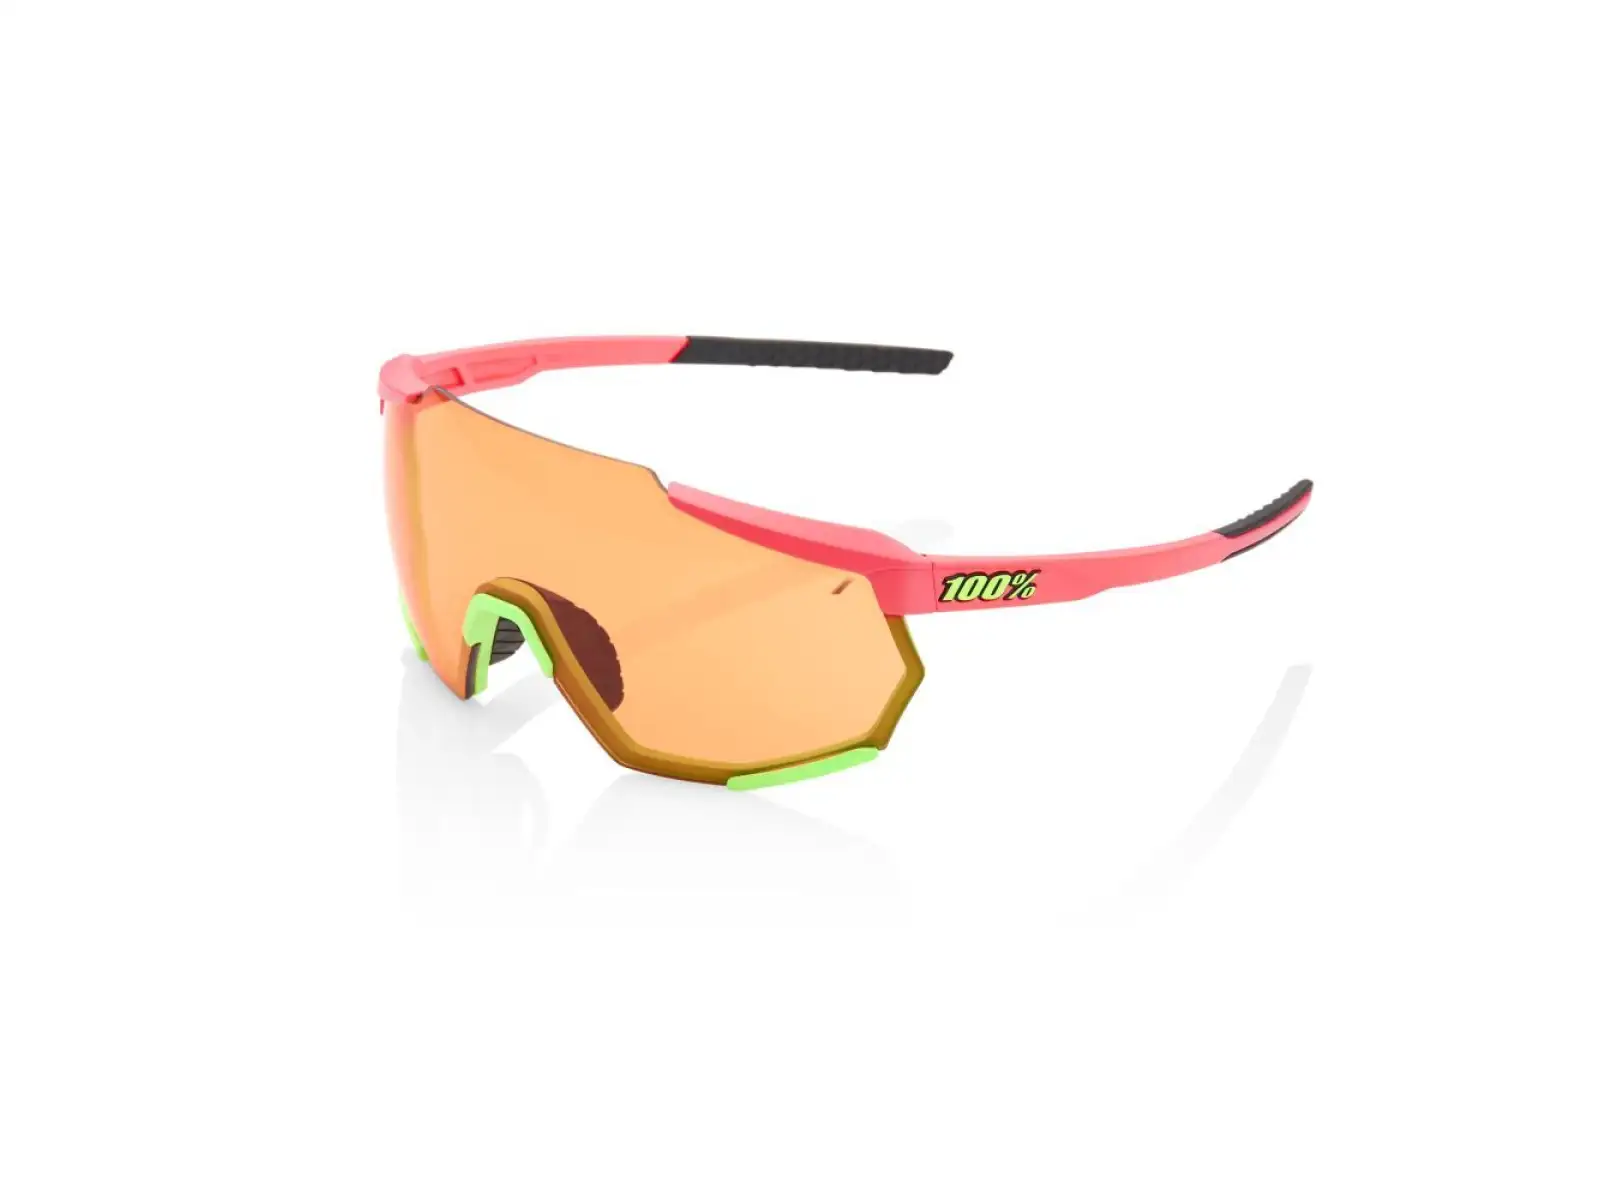 100% Racetrap brýle Matte Washed Out Neon Pink/Persimmon Lens